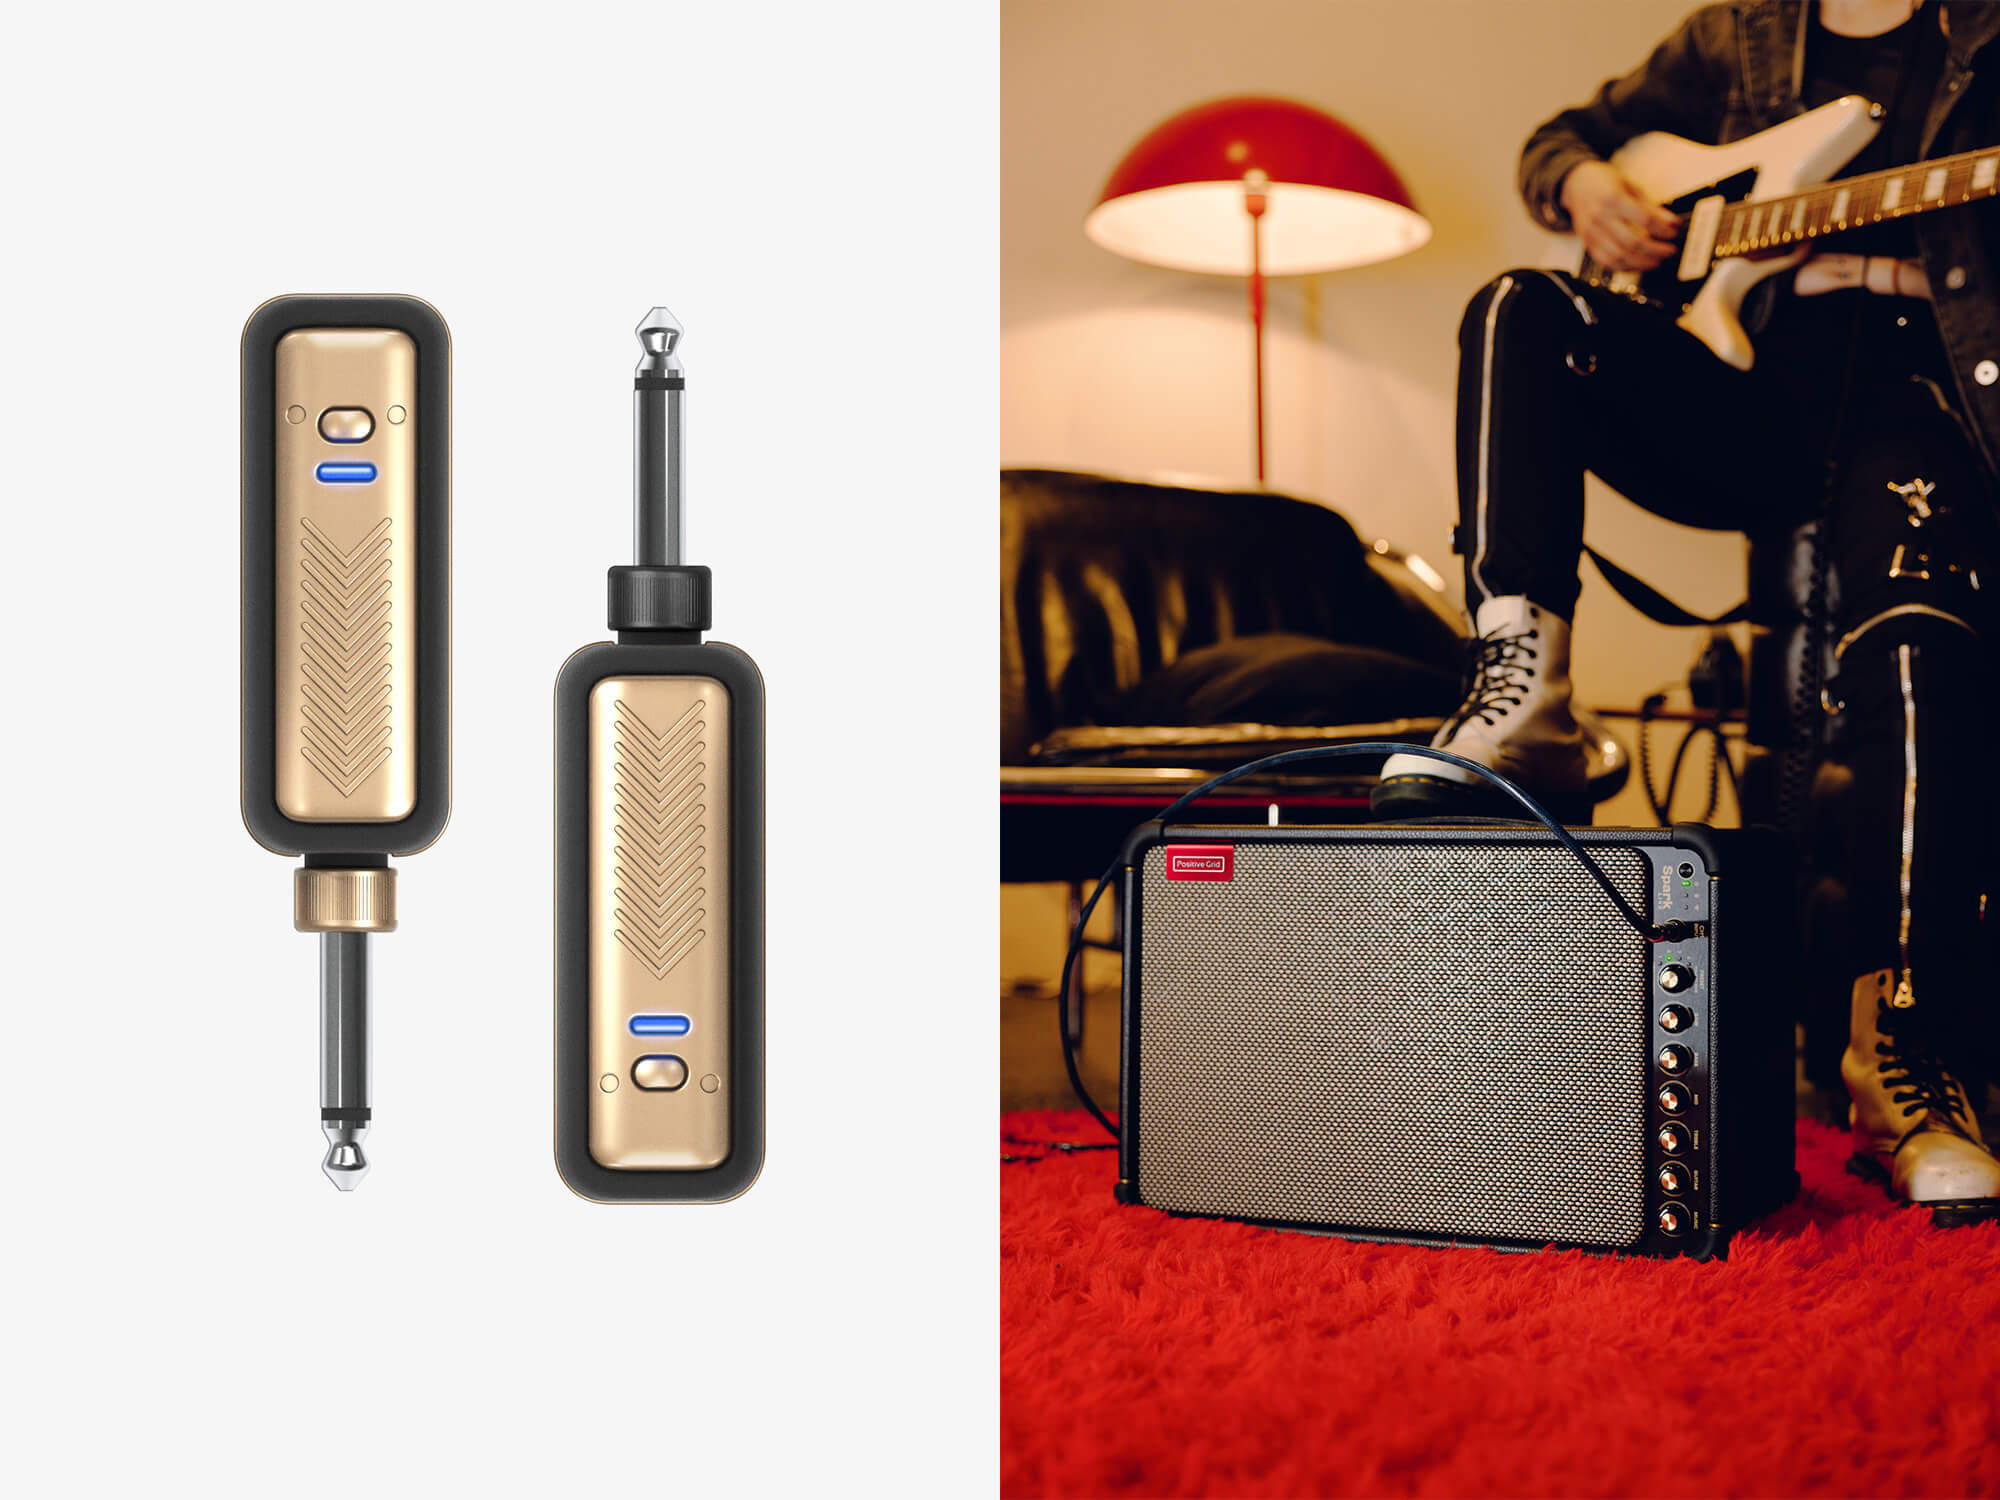 Positive Grid's Spark LINK, which shows two gold coloured devices with plugs attached (left). Spark LIVE (right) which is a compact amp. A guitarist is plugged into it and is resting their foot on it as they play.